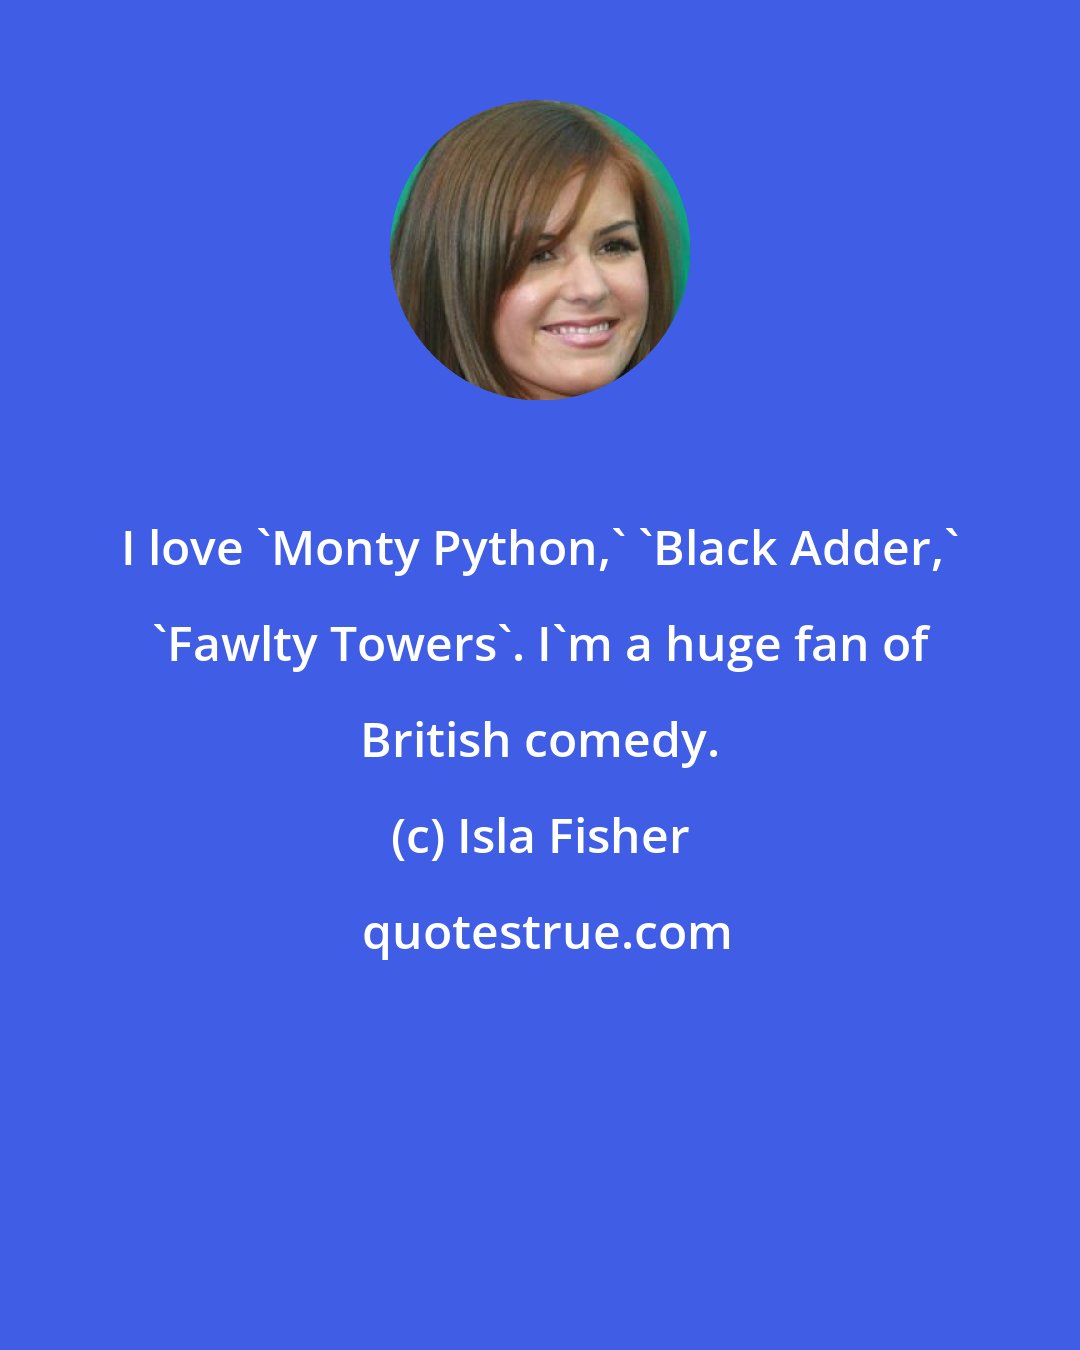 Isla Fisher: I love 'Monty Python,' 'Black Adder,' 'Fawlty Towers'. I'm a huge fan of British comedy.